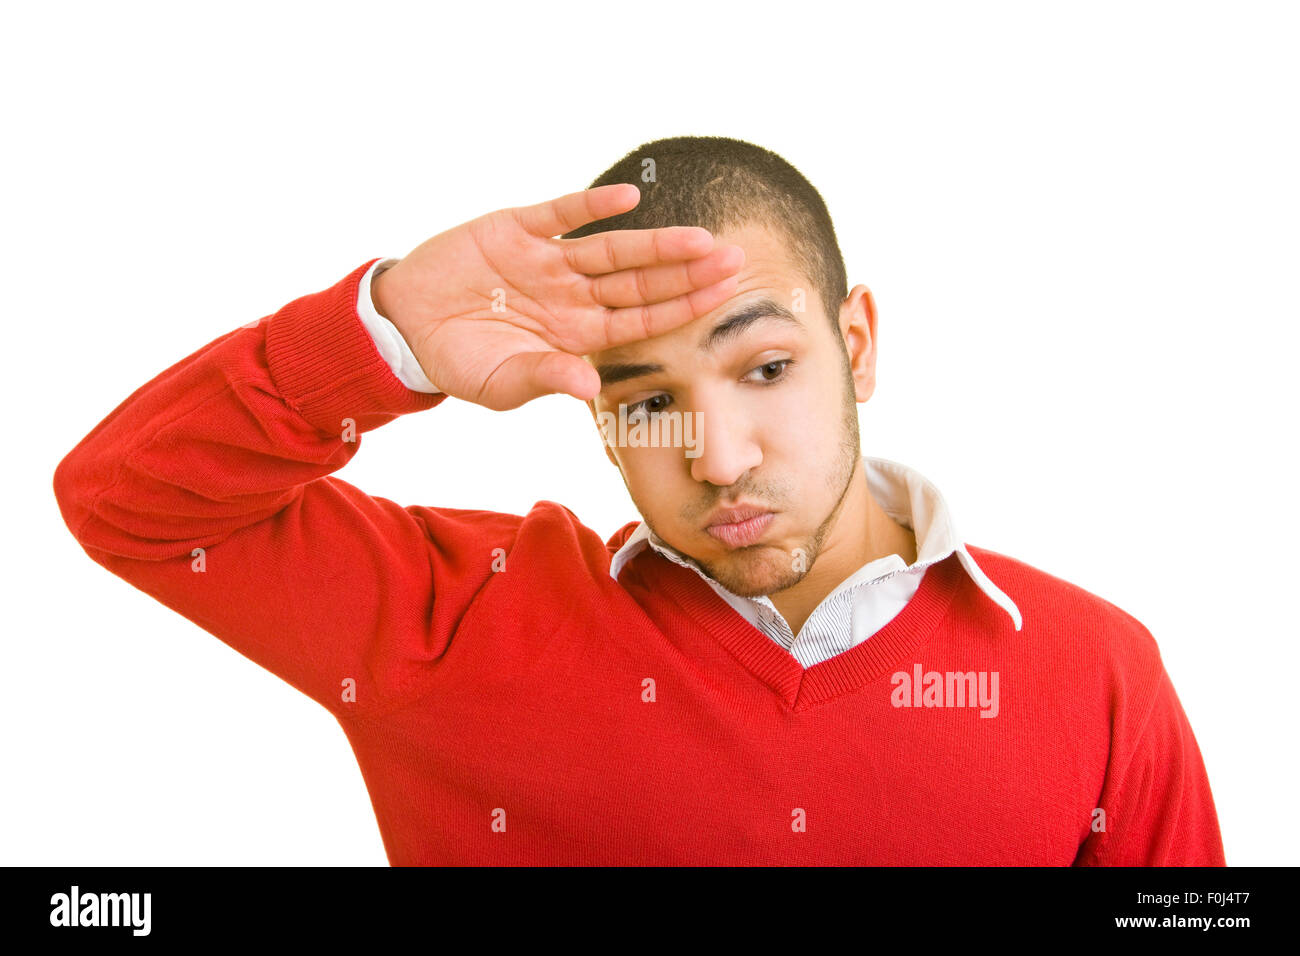 Exhausted man wiping sweat off his forehead Stock Photo